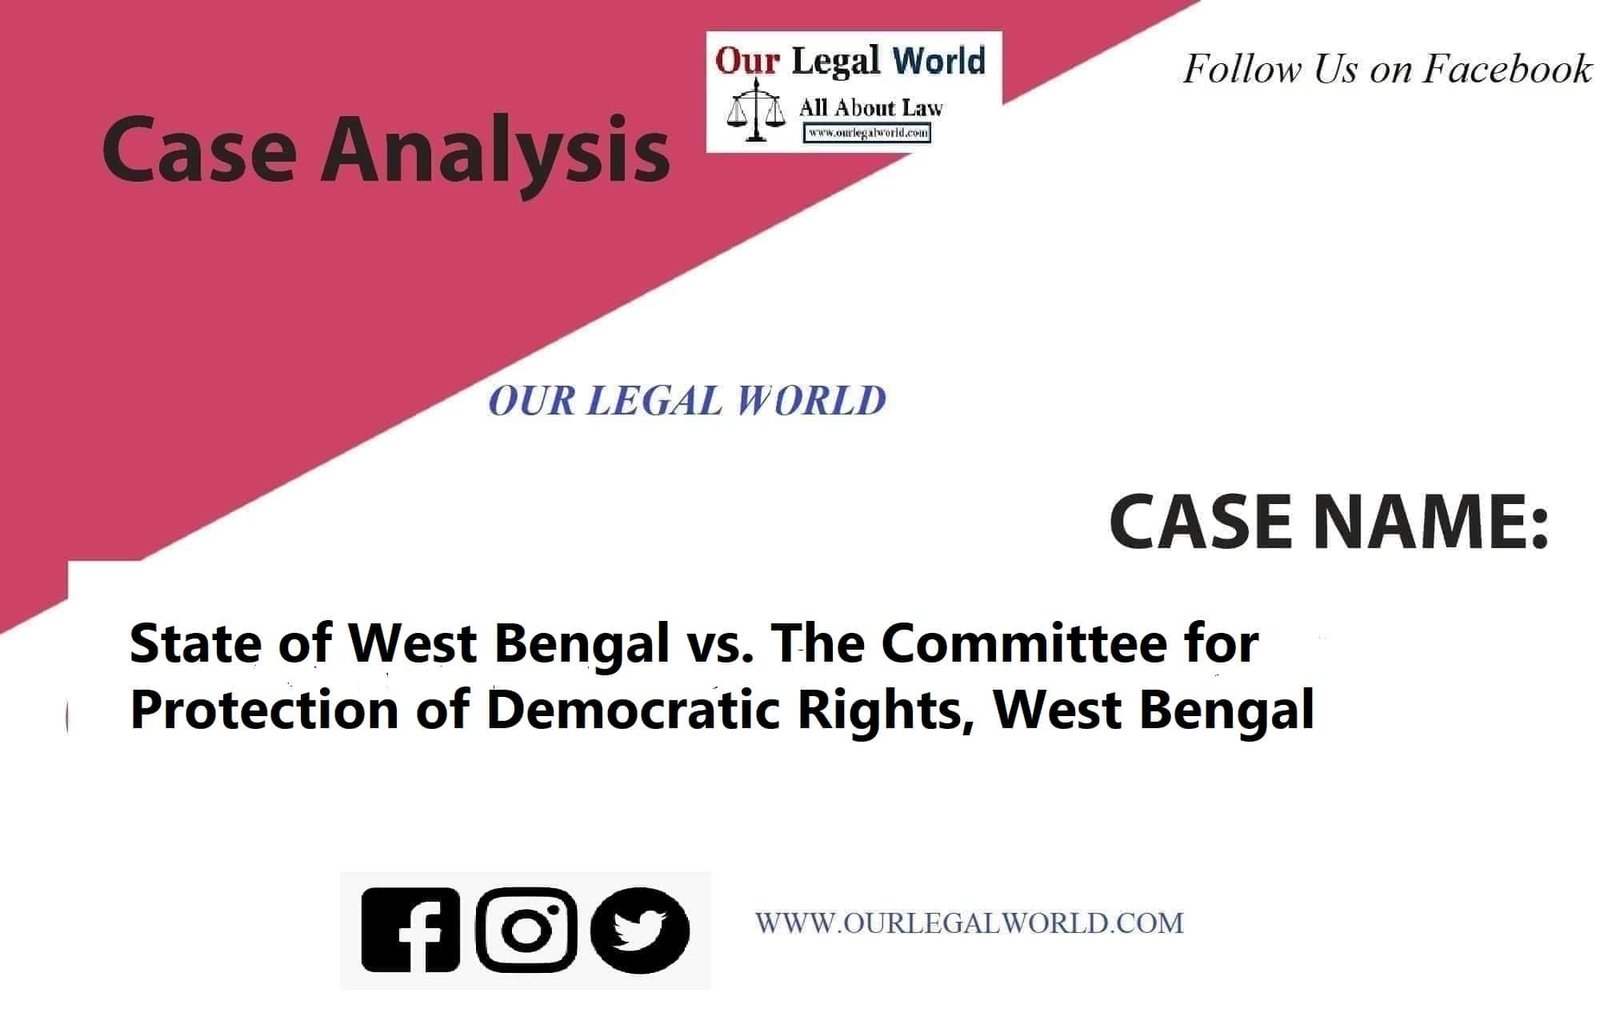 State of West Bengal vs. The Committee for Protection of Democratic Rights, West Bengal